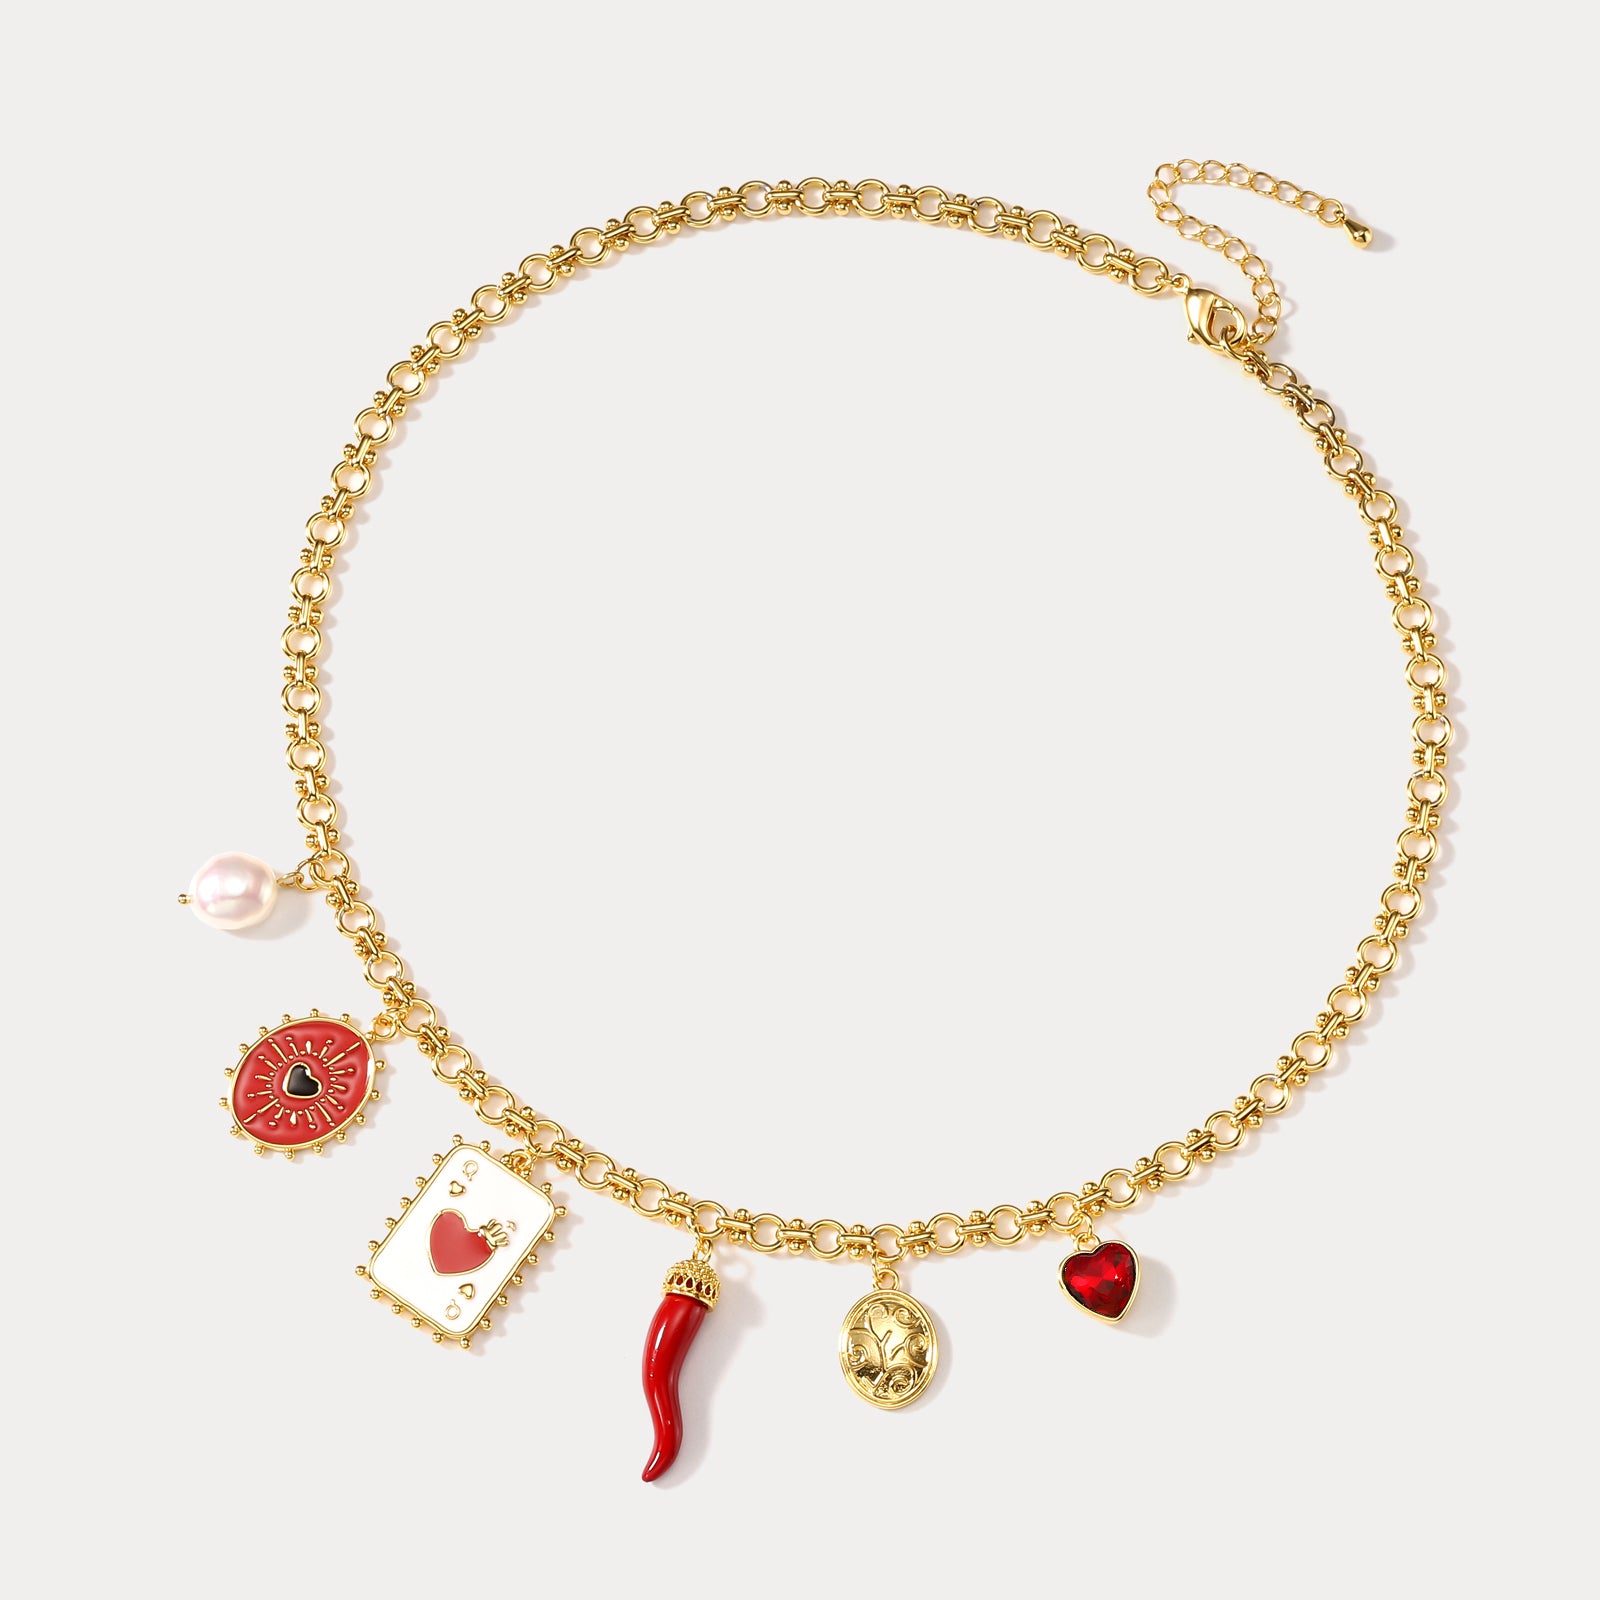 Queen's Love Chili Charm Necklace